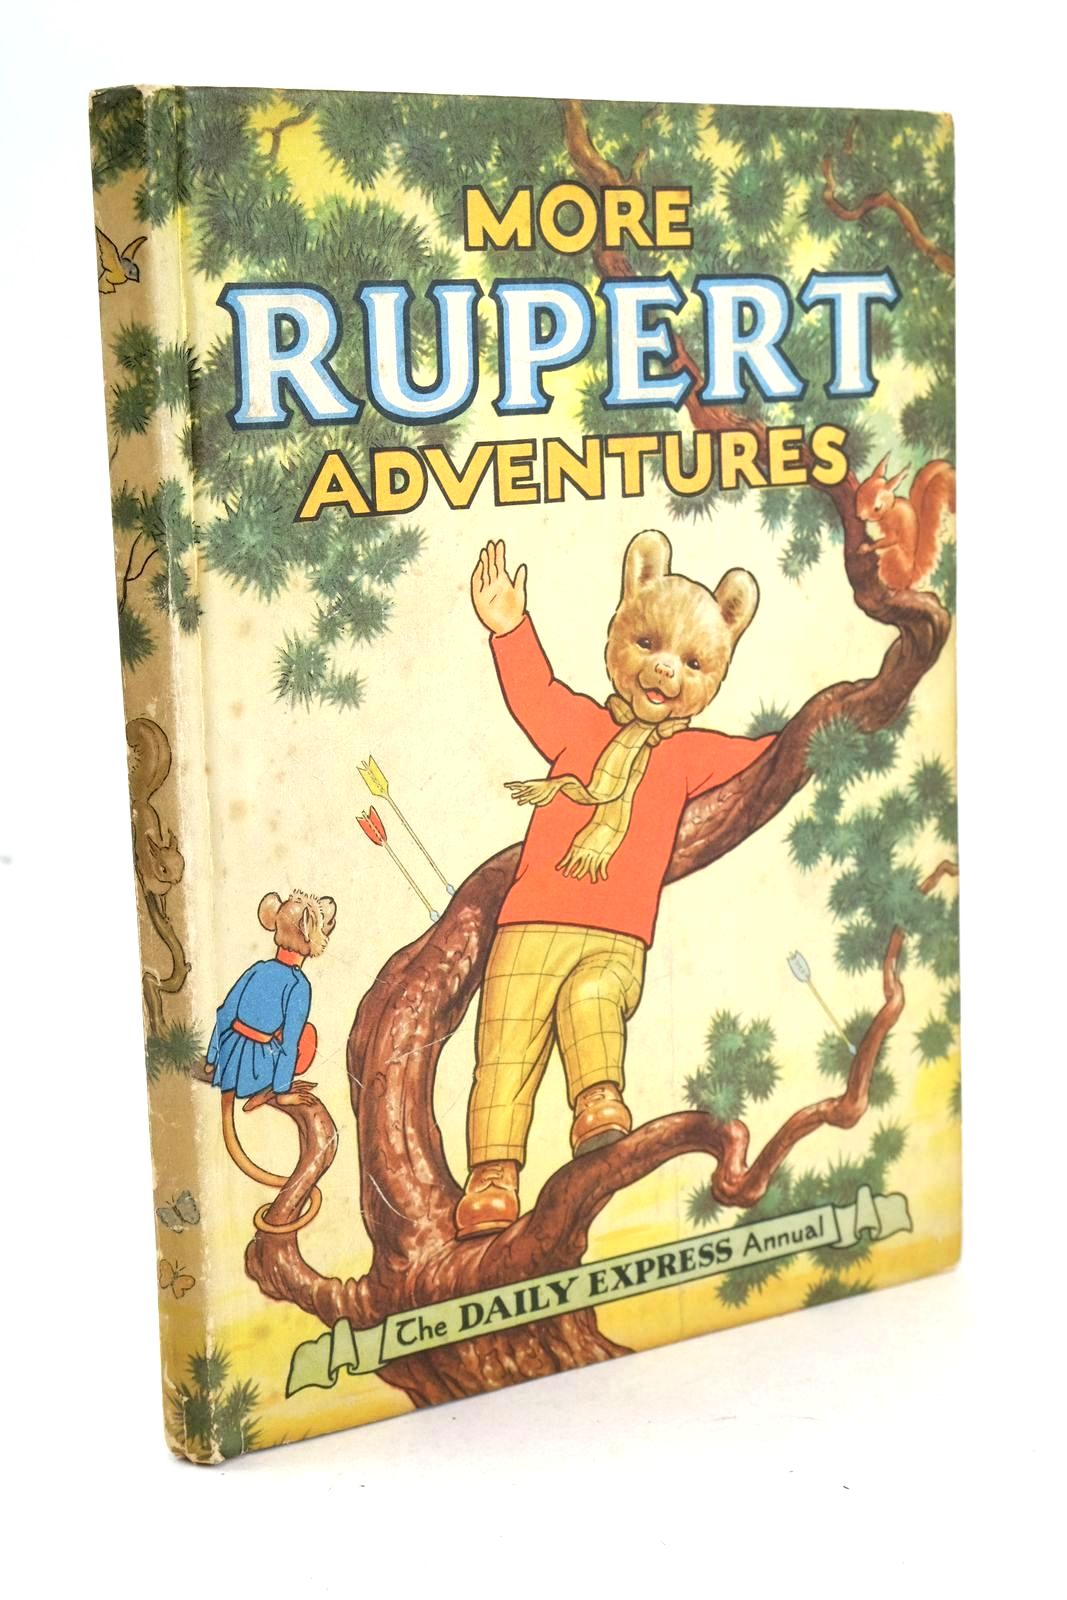 Photo of RUPERT ANNUAL 1952 - MORE RUPERT ADVENTURES written by Bestall, Alfred illustrated by Bestall, Alfred published by Daily Express (STOCK CODE: 1326245)  for sale by Stella & Rose's Books